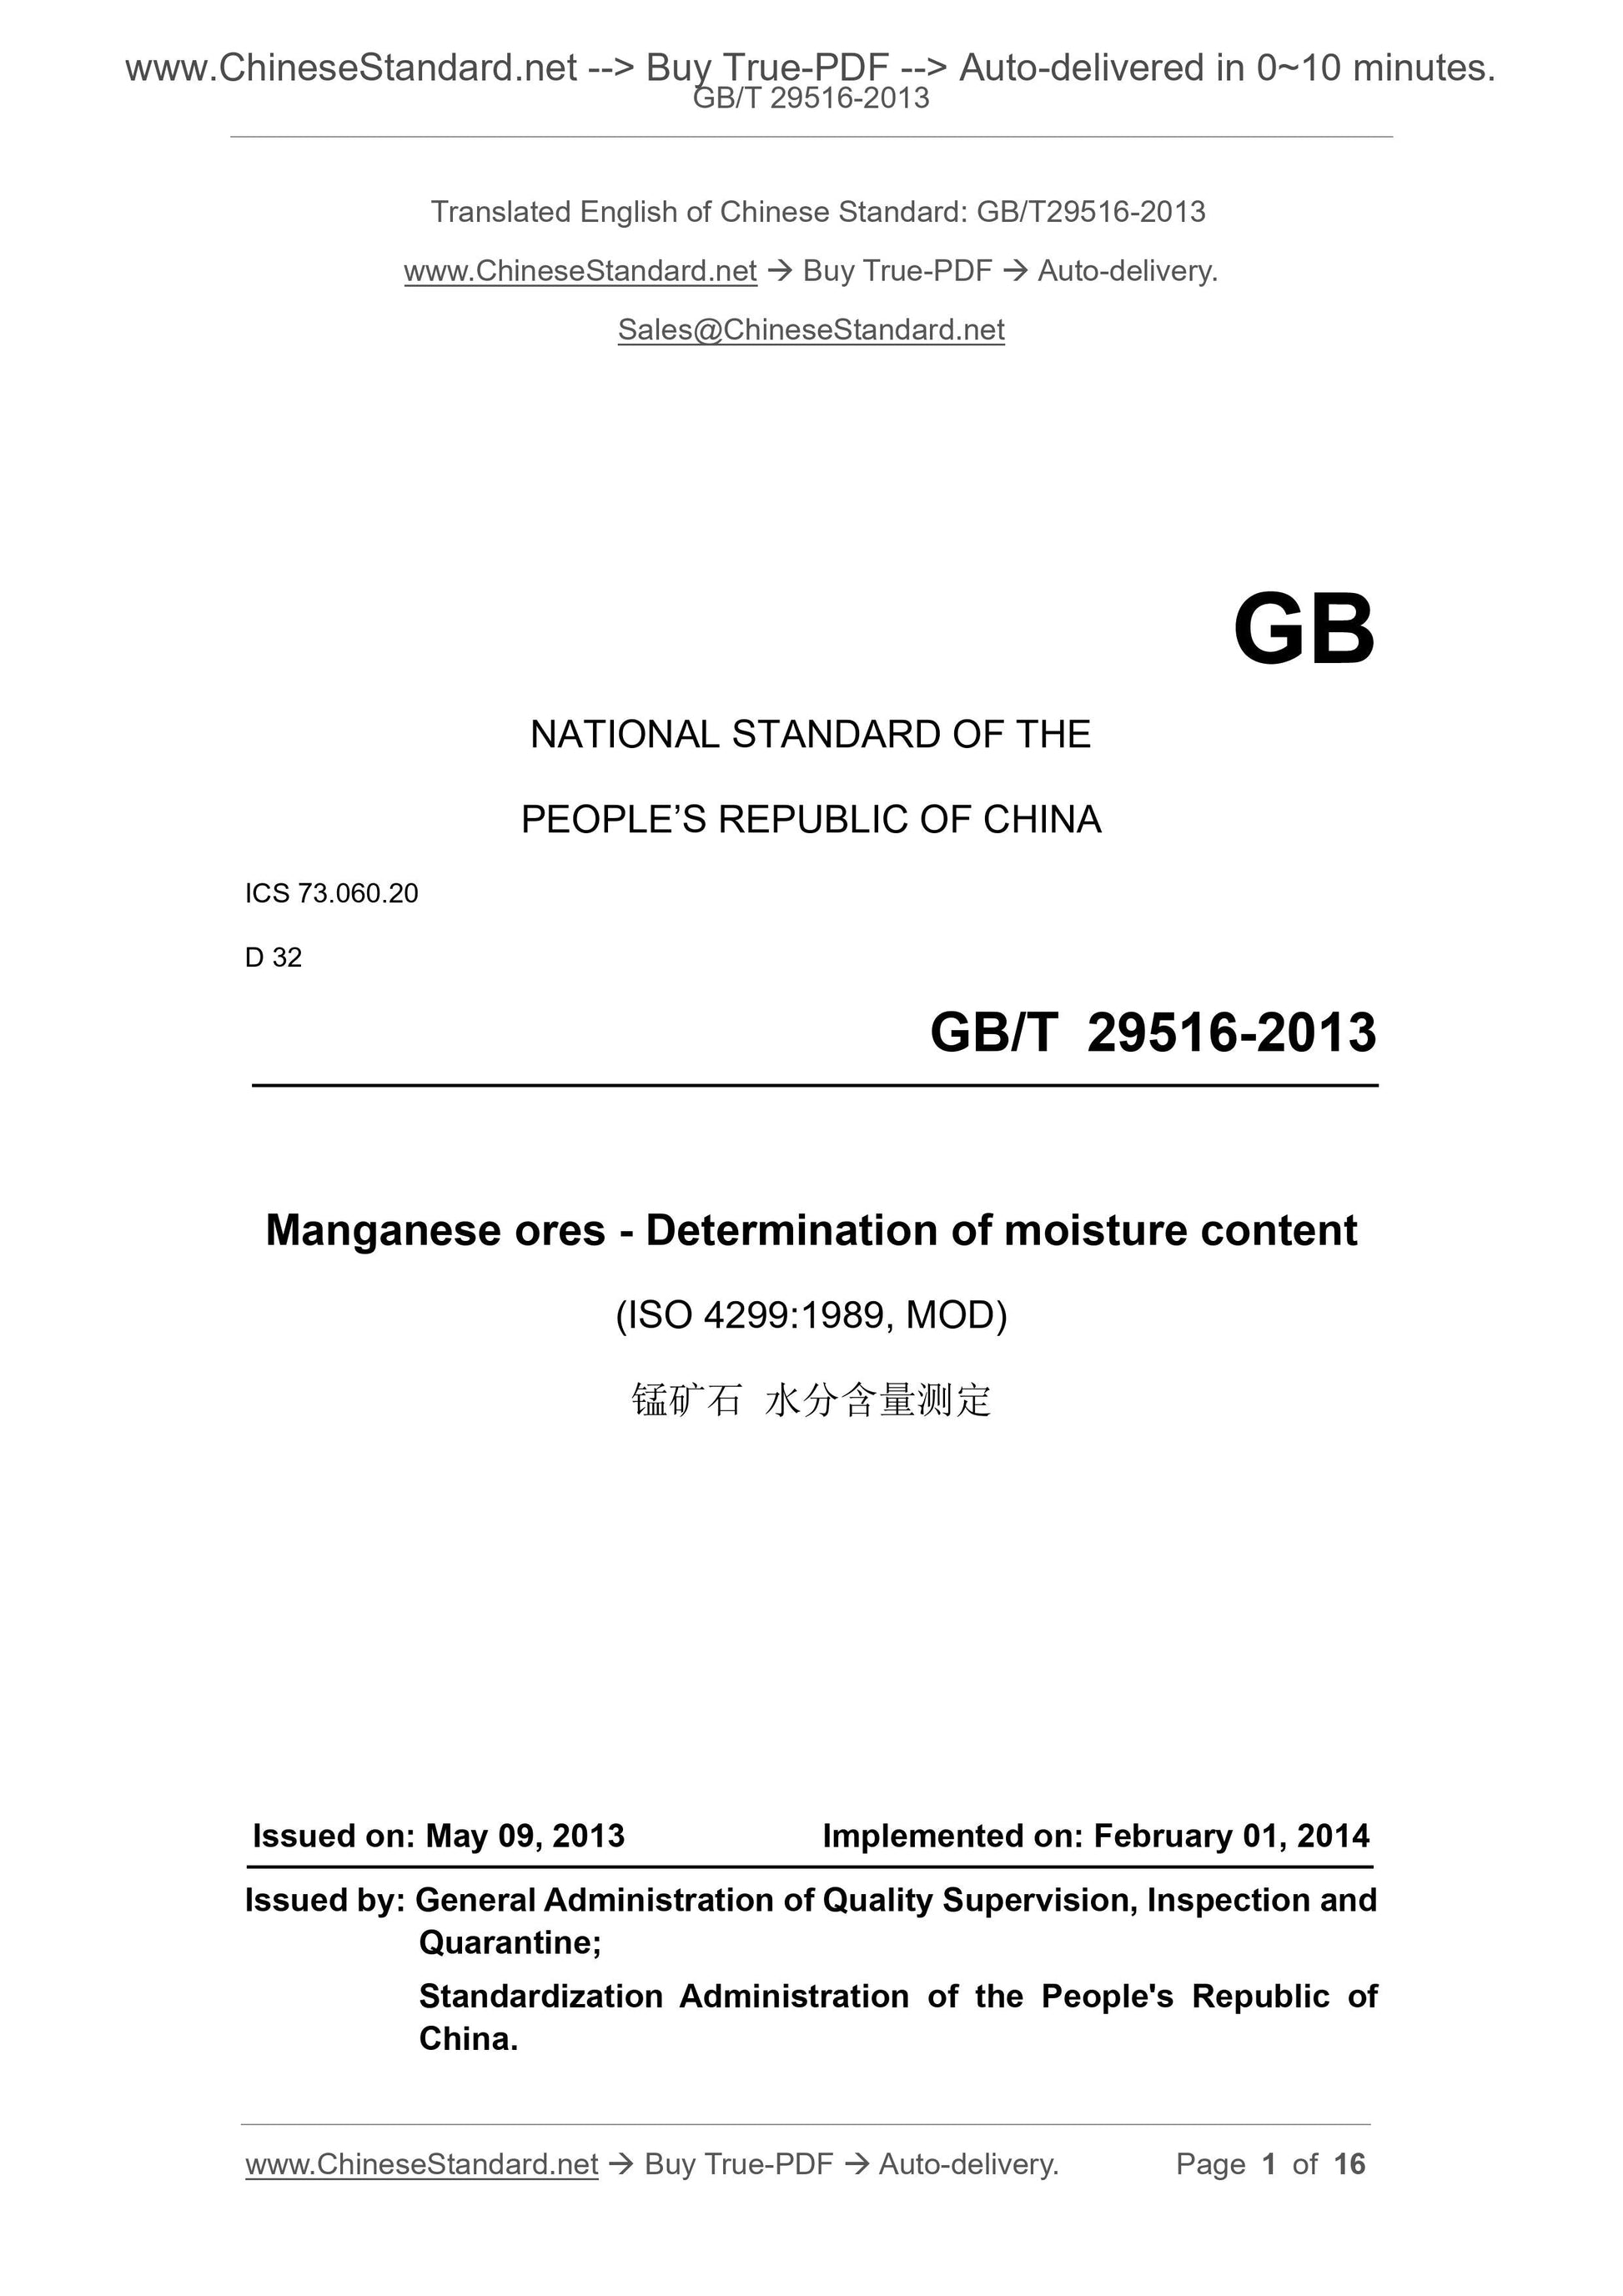 GB/T 29516-2013 Page 1